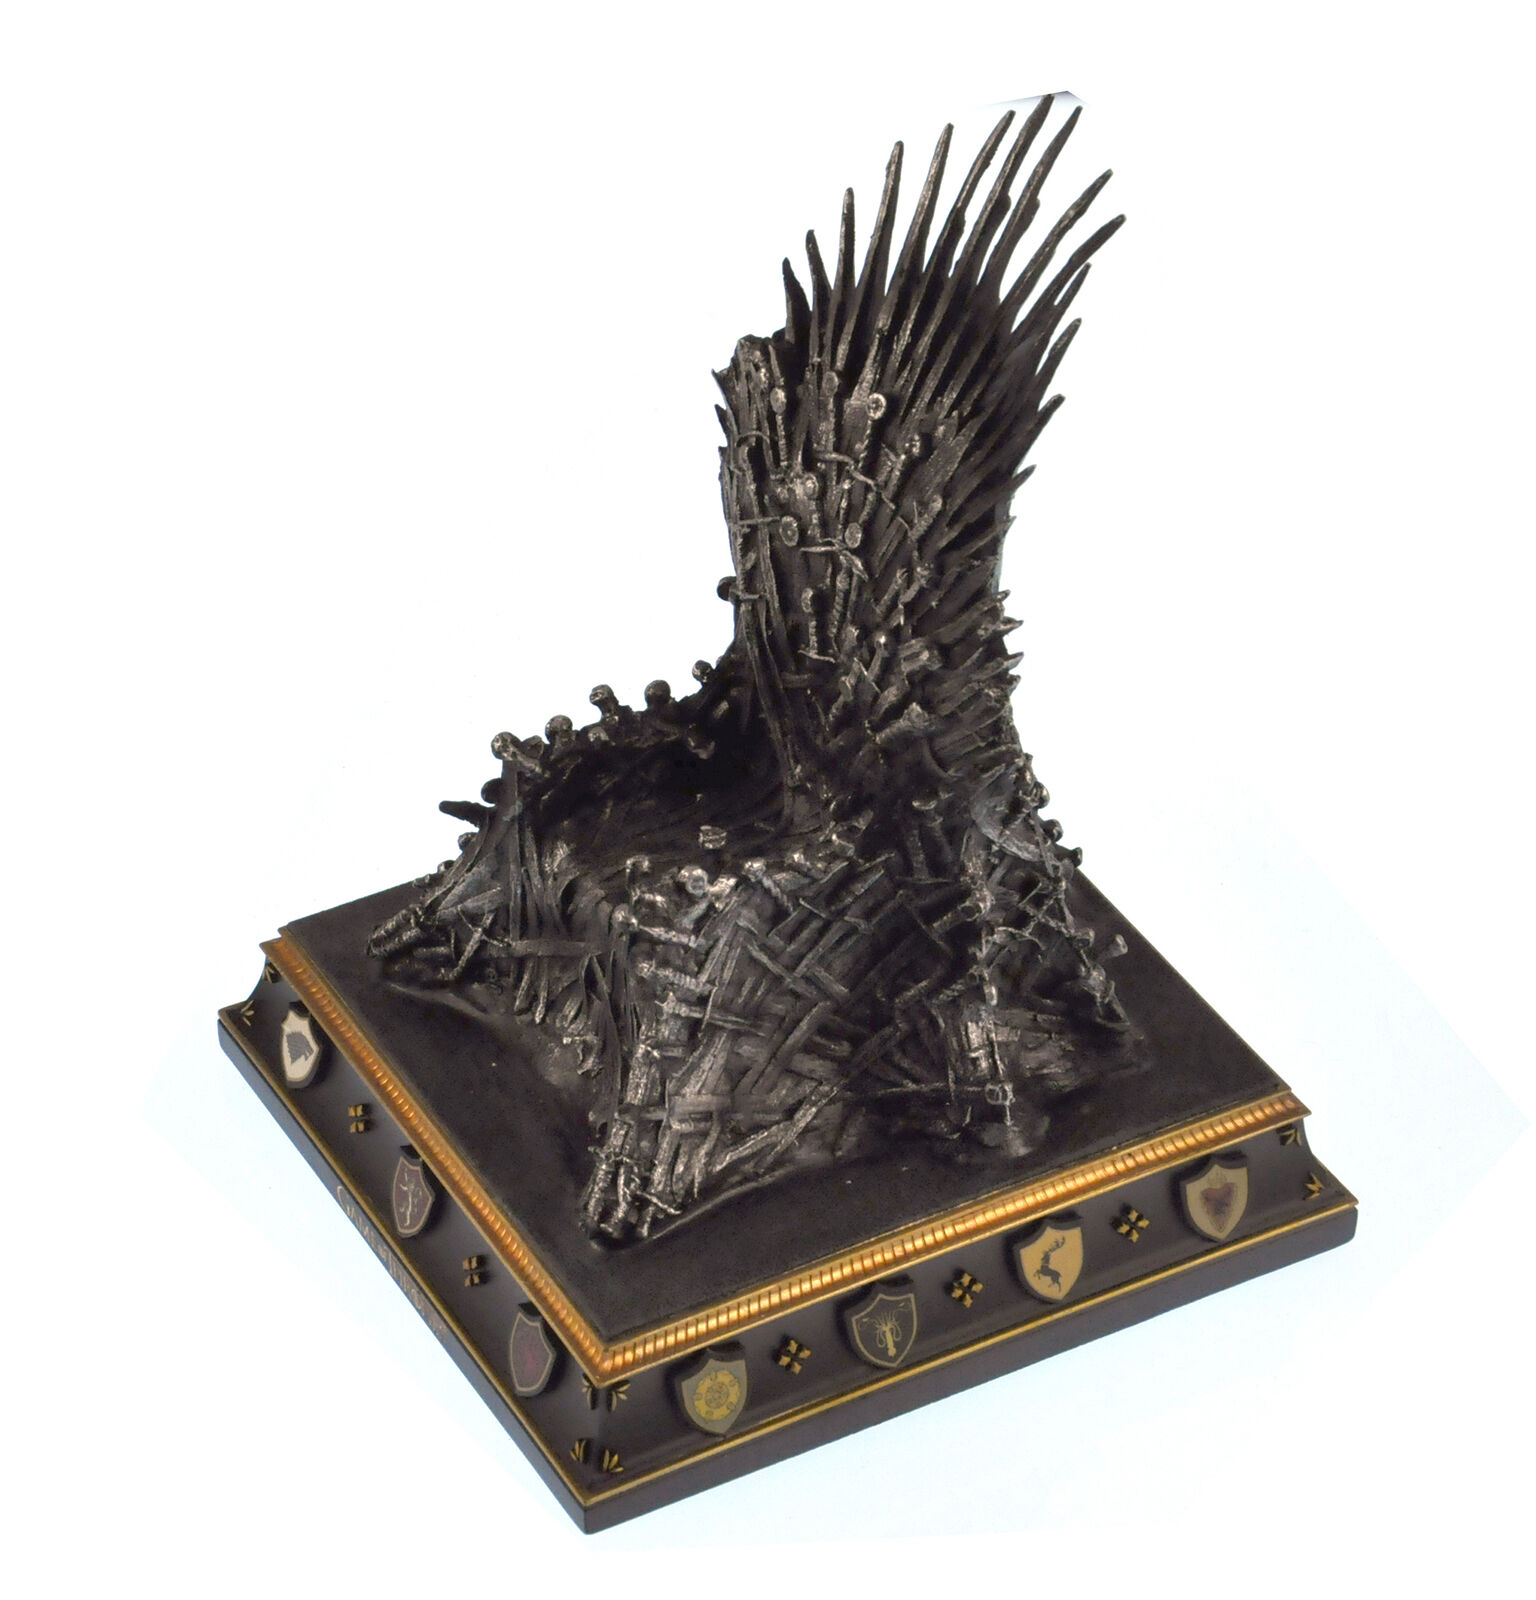 The Iron Throne - The Game of Thrones Replica 1